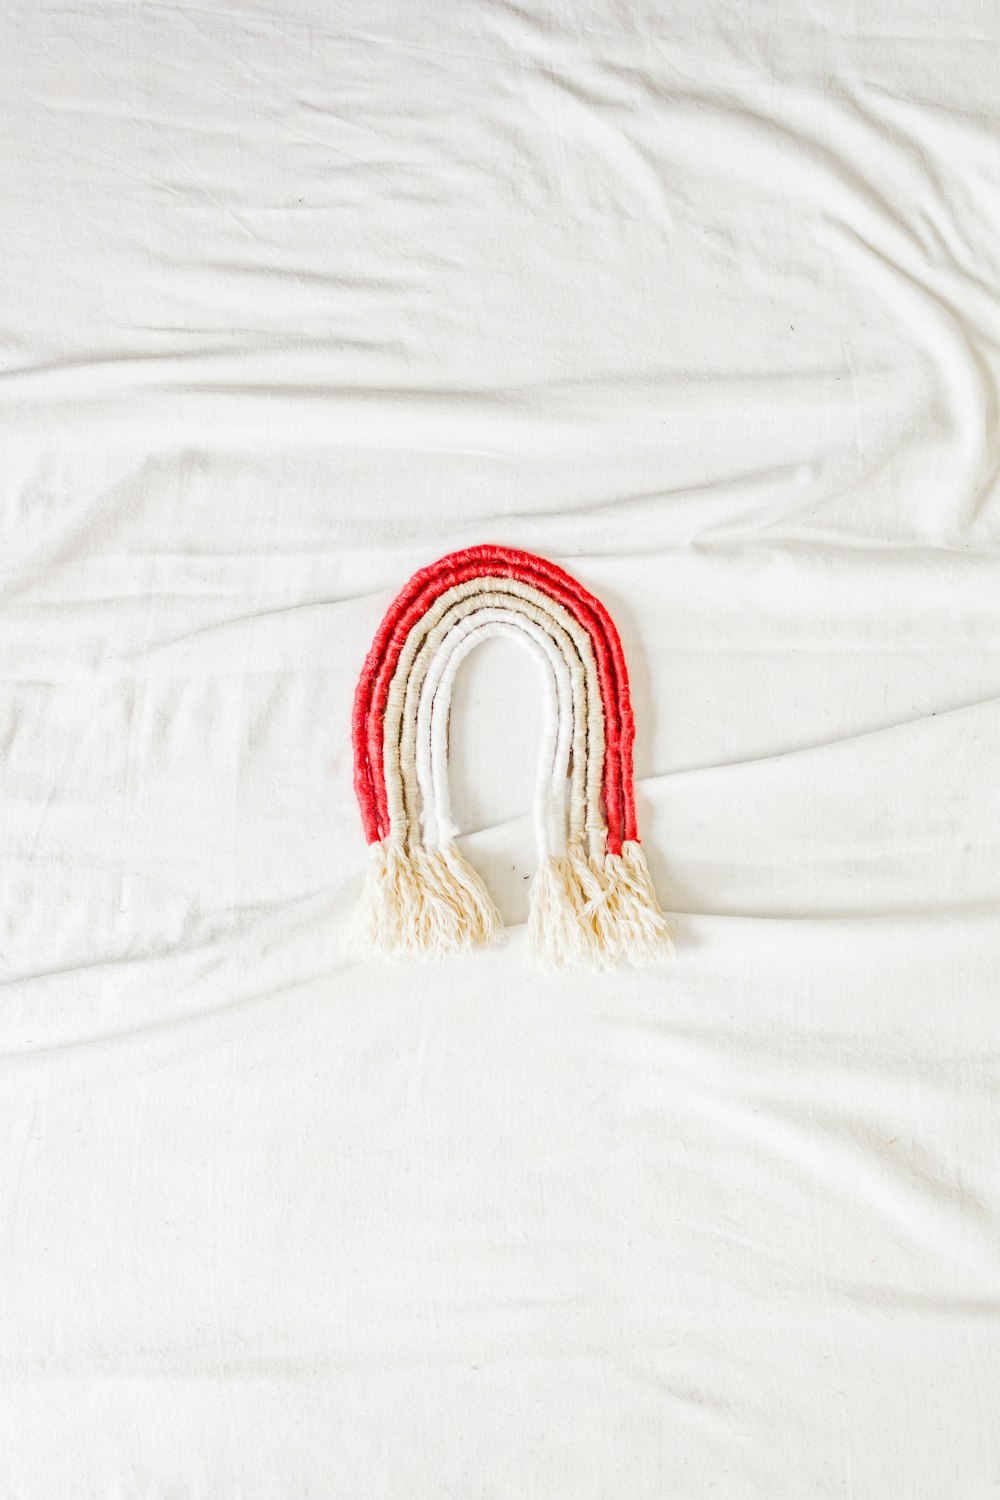 red and gold bracelet on white textile